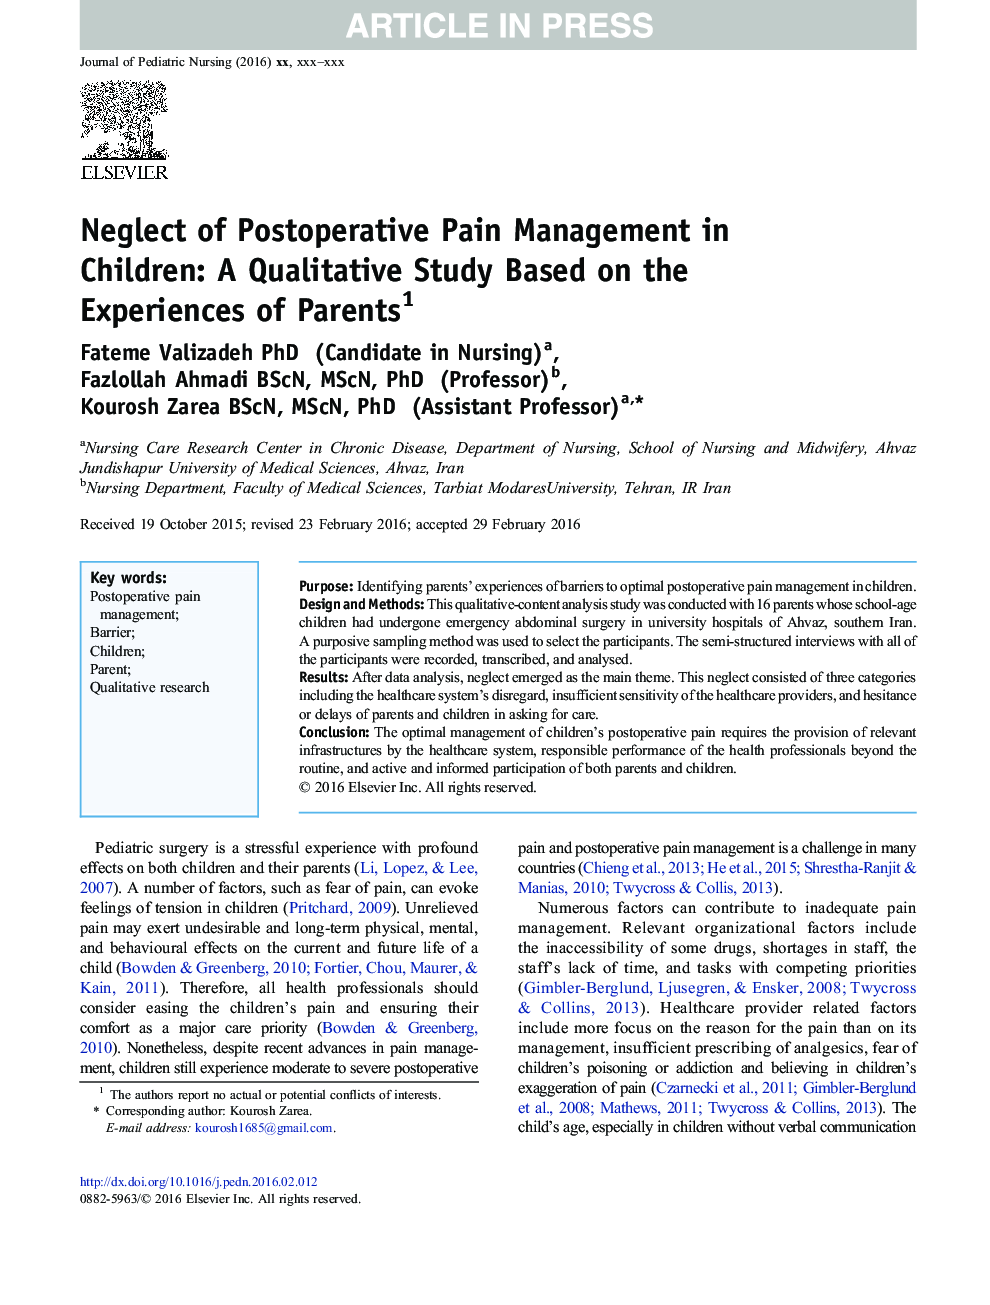 Neglect of Postoperative Pain Management in Children: A Qualitative Study Based on the Experiences of Parents